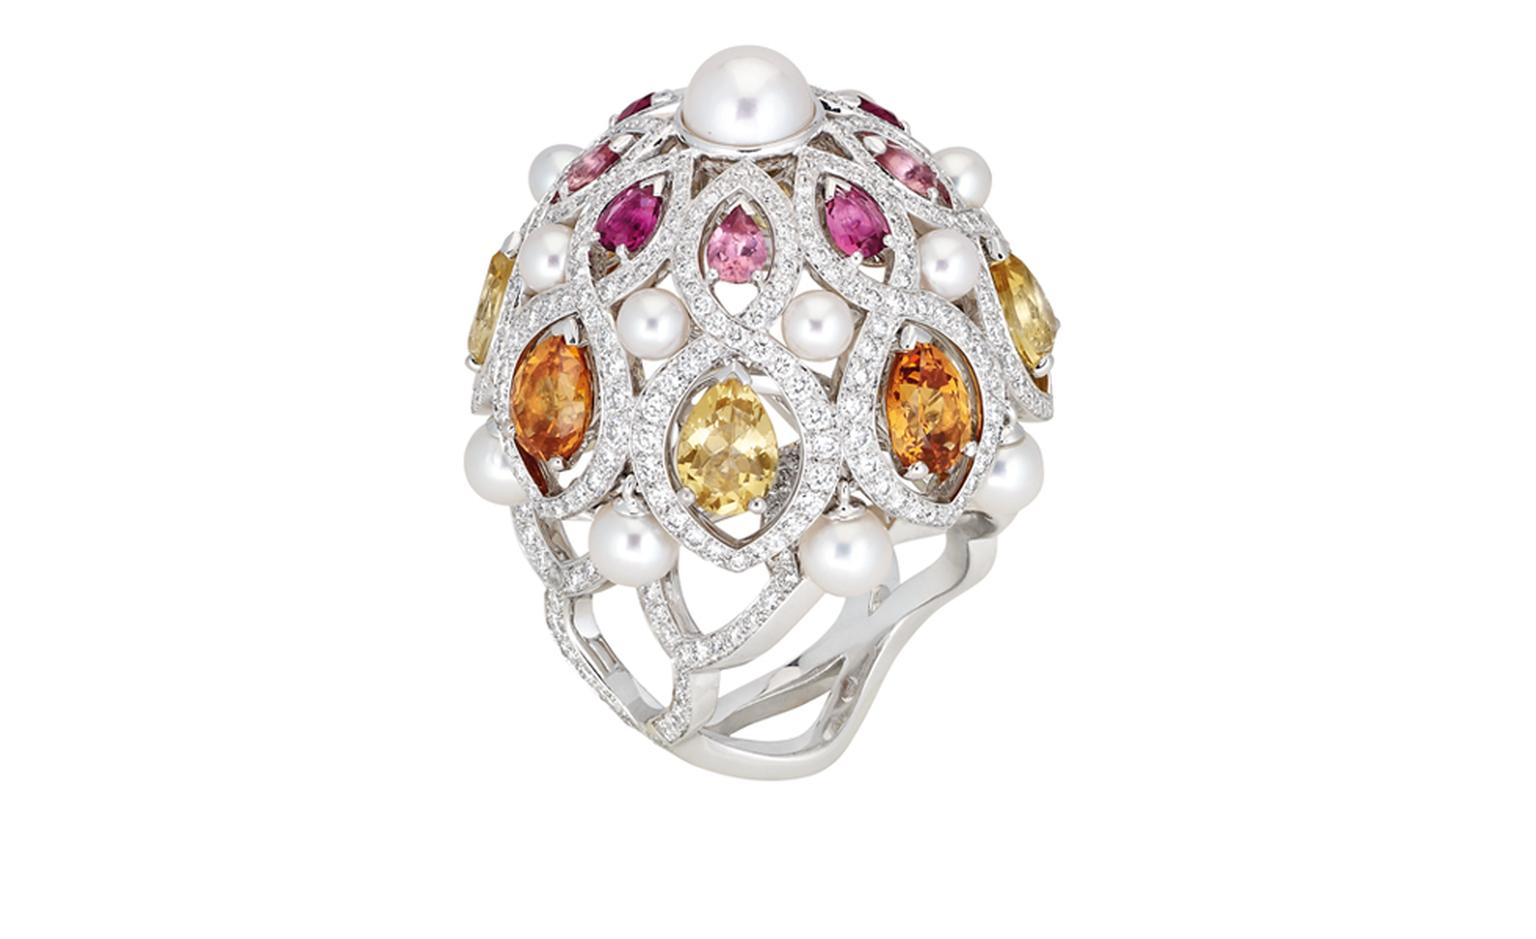 Chanel Secrets D'Orient Coupoles Ring in 18 karat white gold, diamonds, cultured pearls, rebellites, pink tourmalines, garnets and citrines. POA